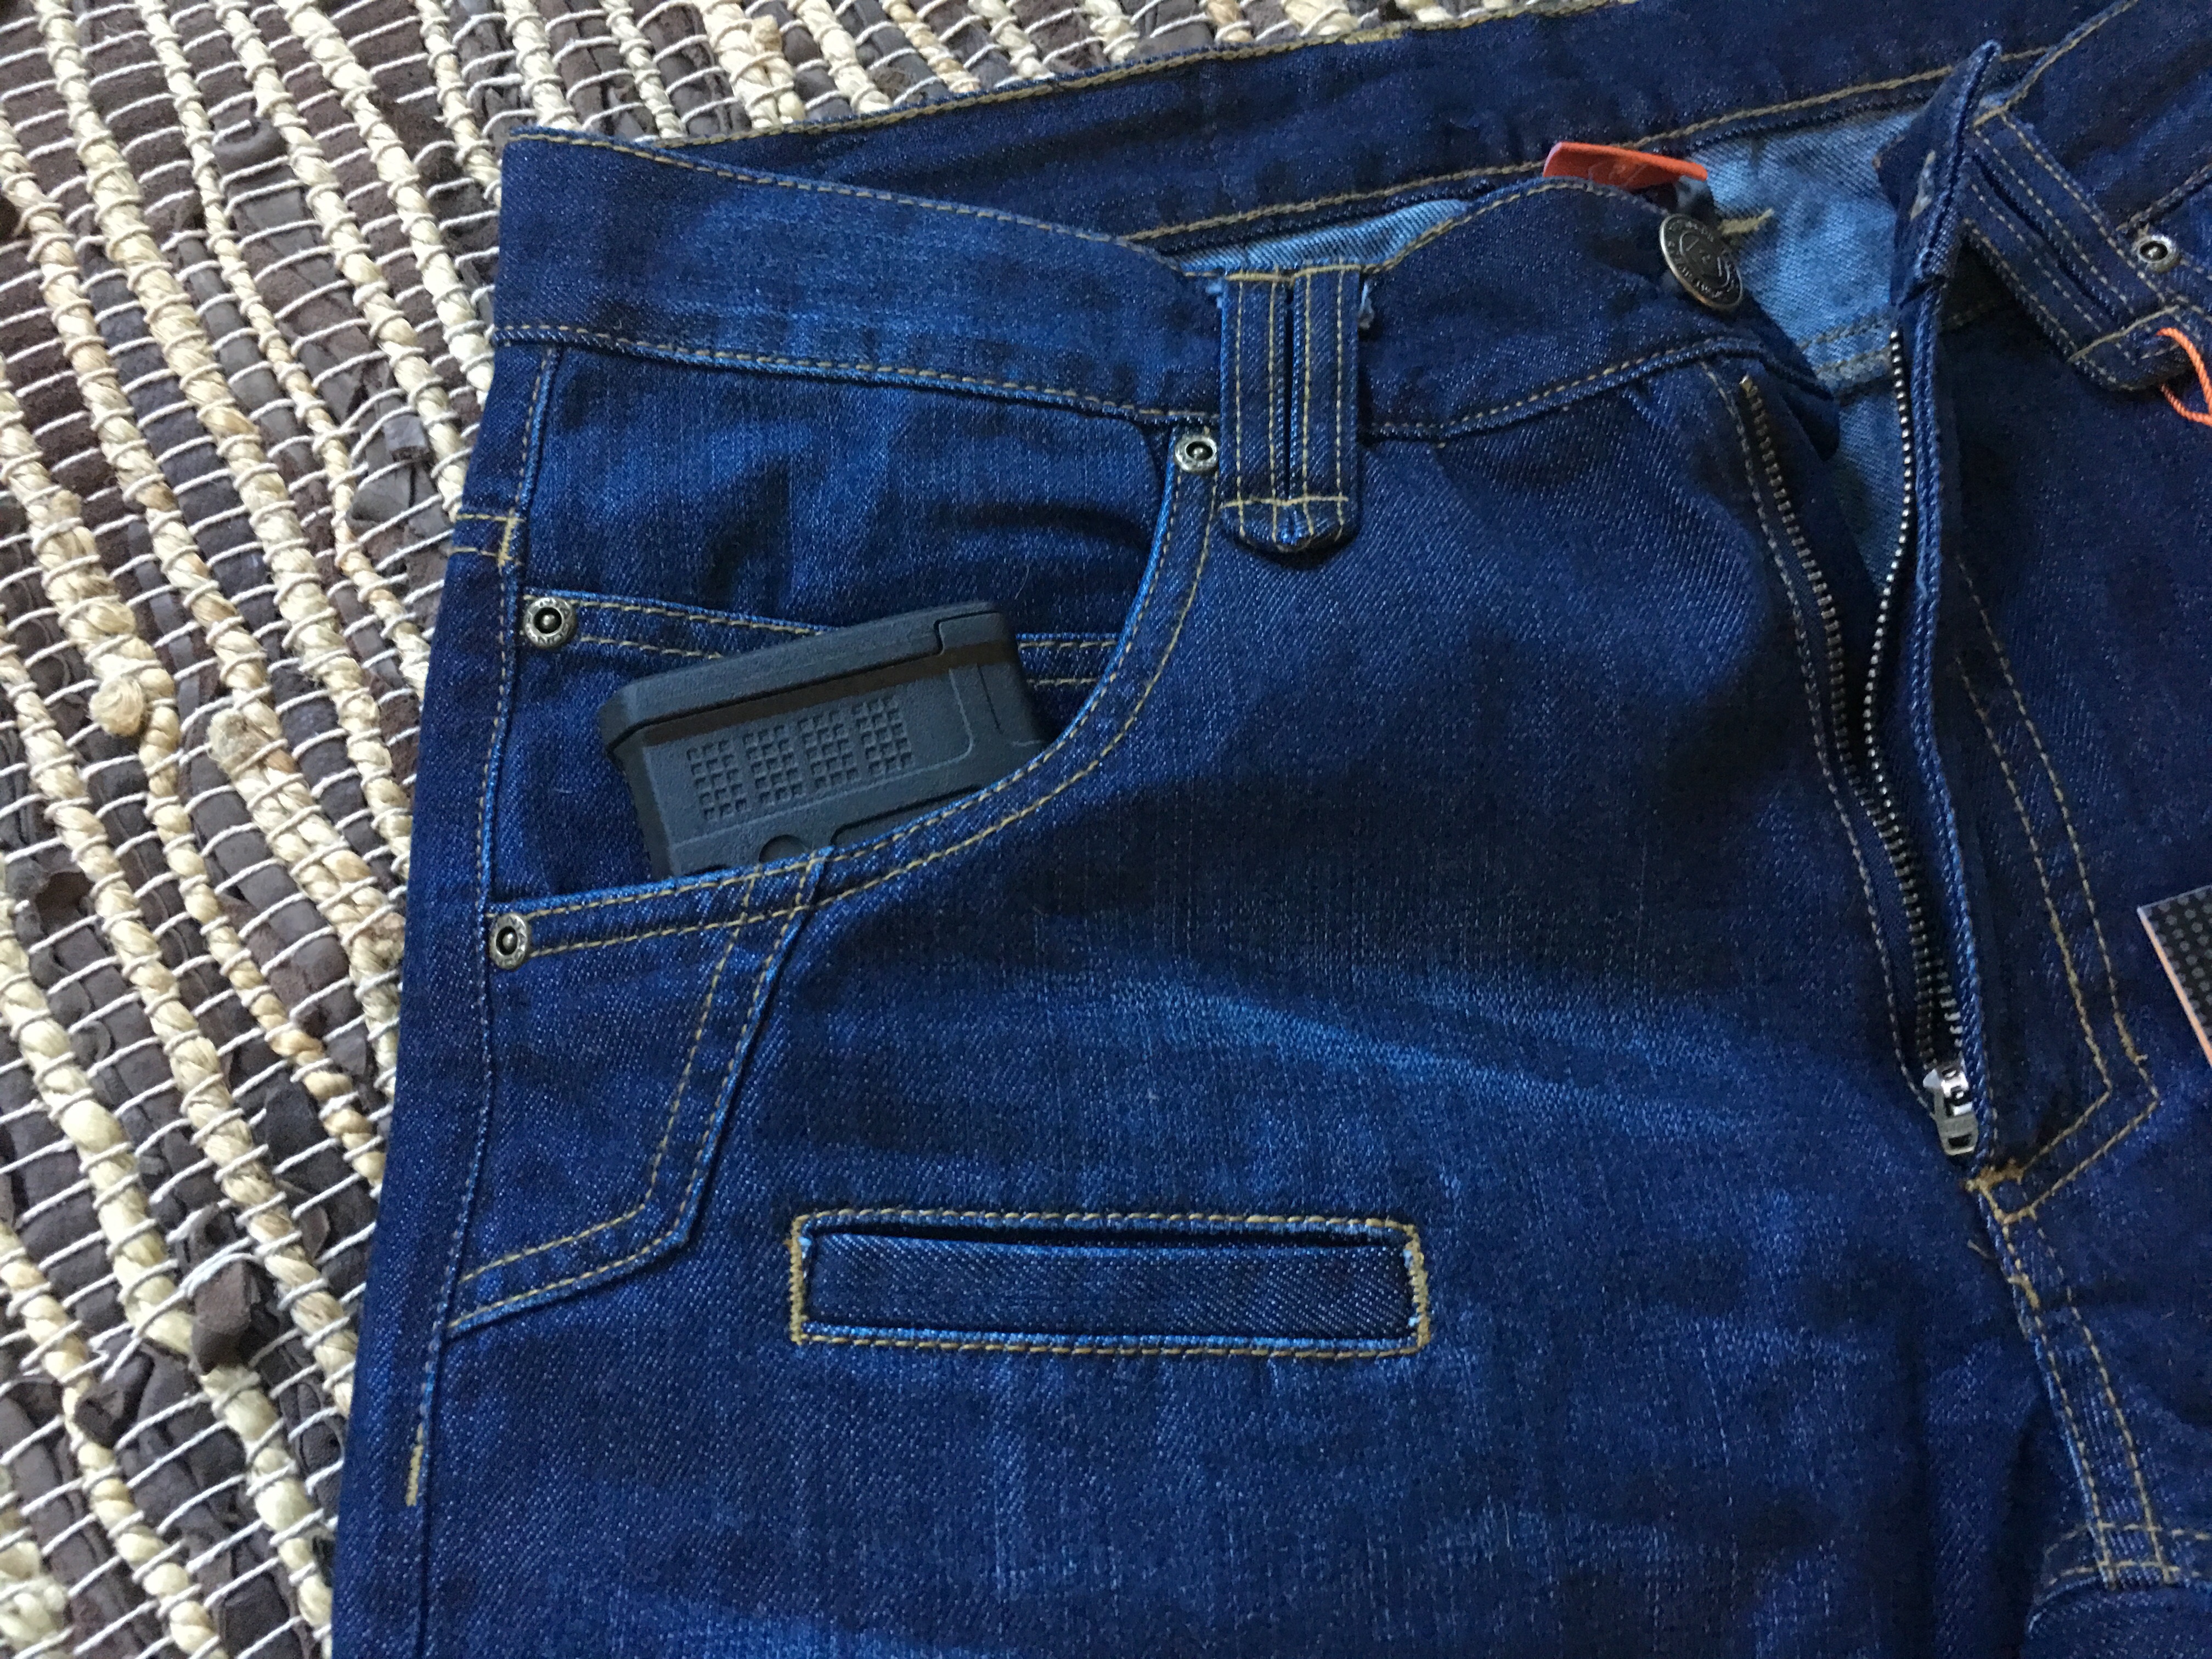 jeans with lots of pockets